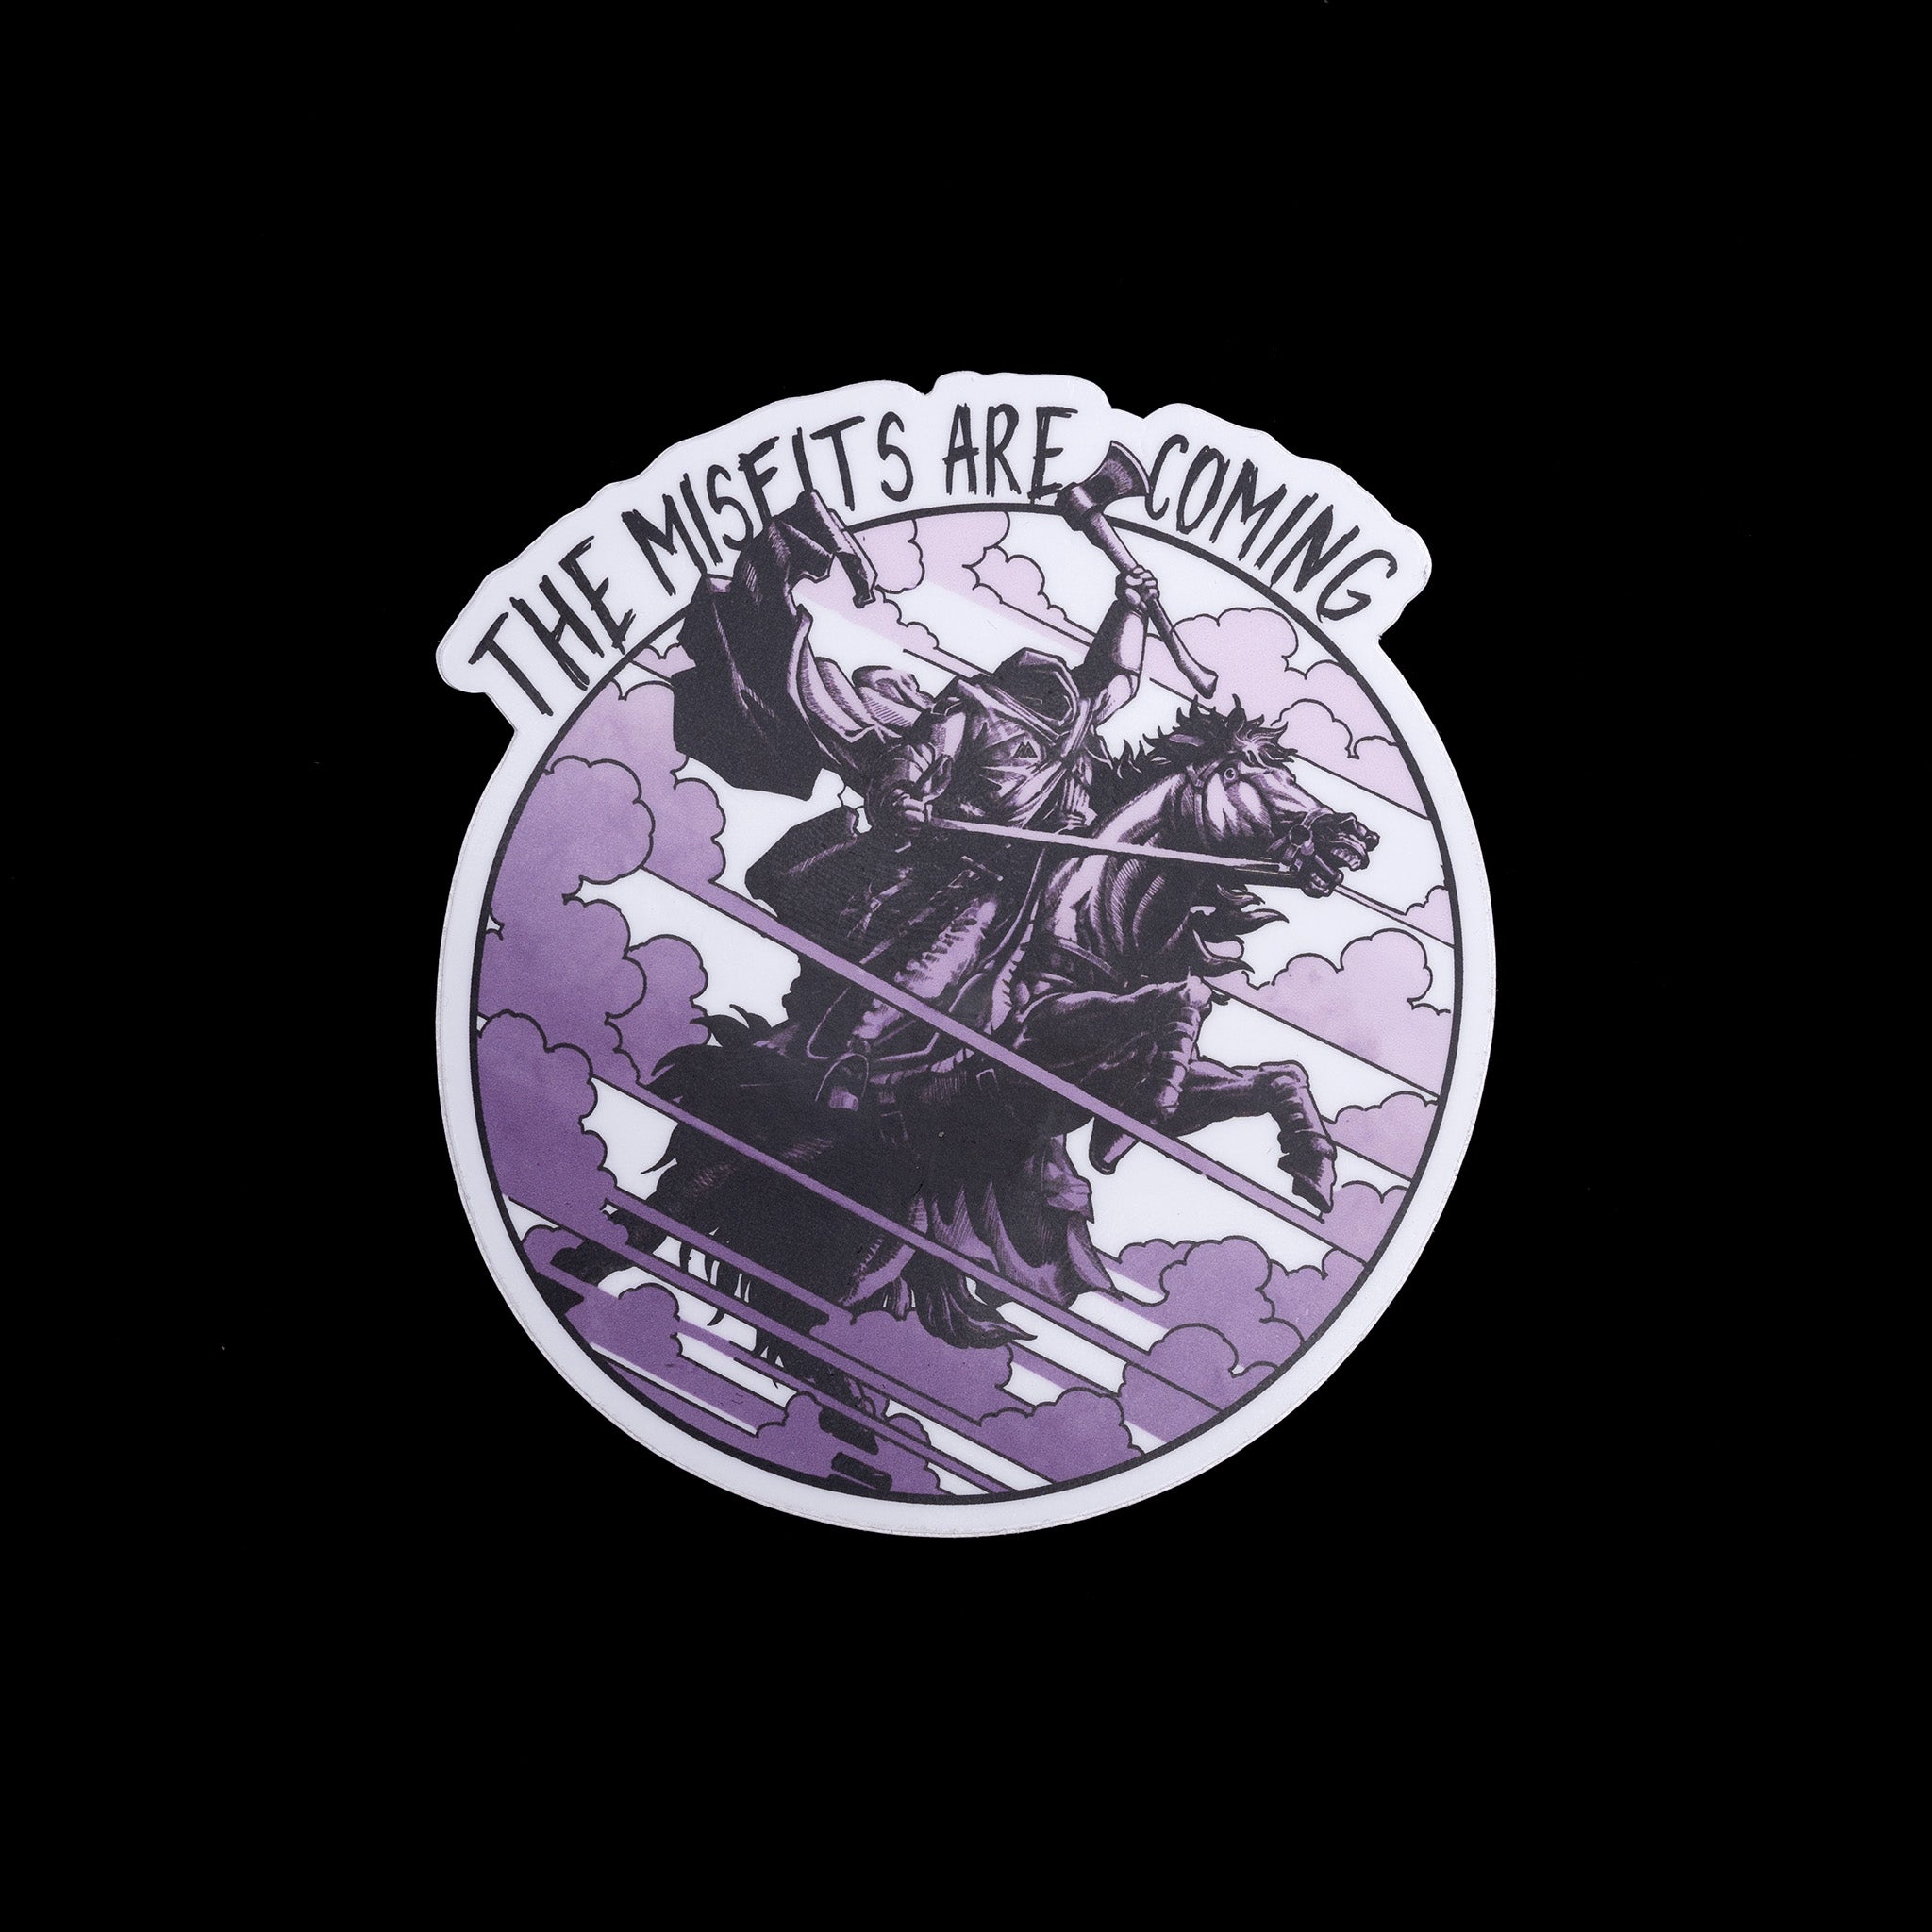 The Misfits Are Coming Sticker